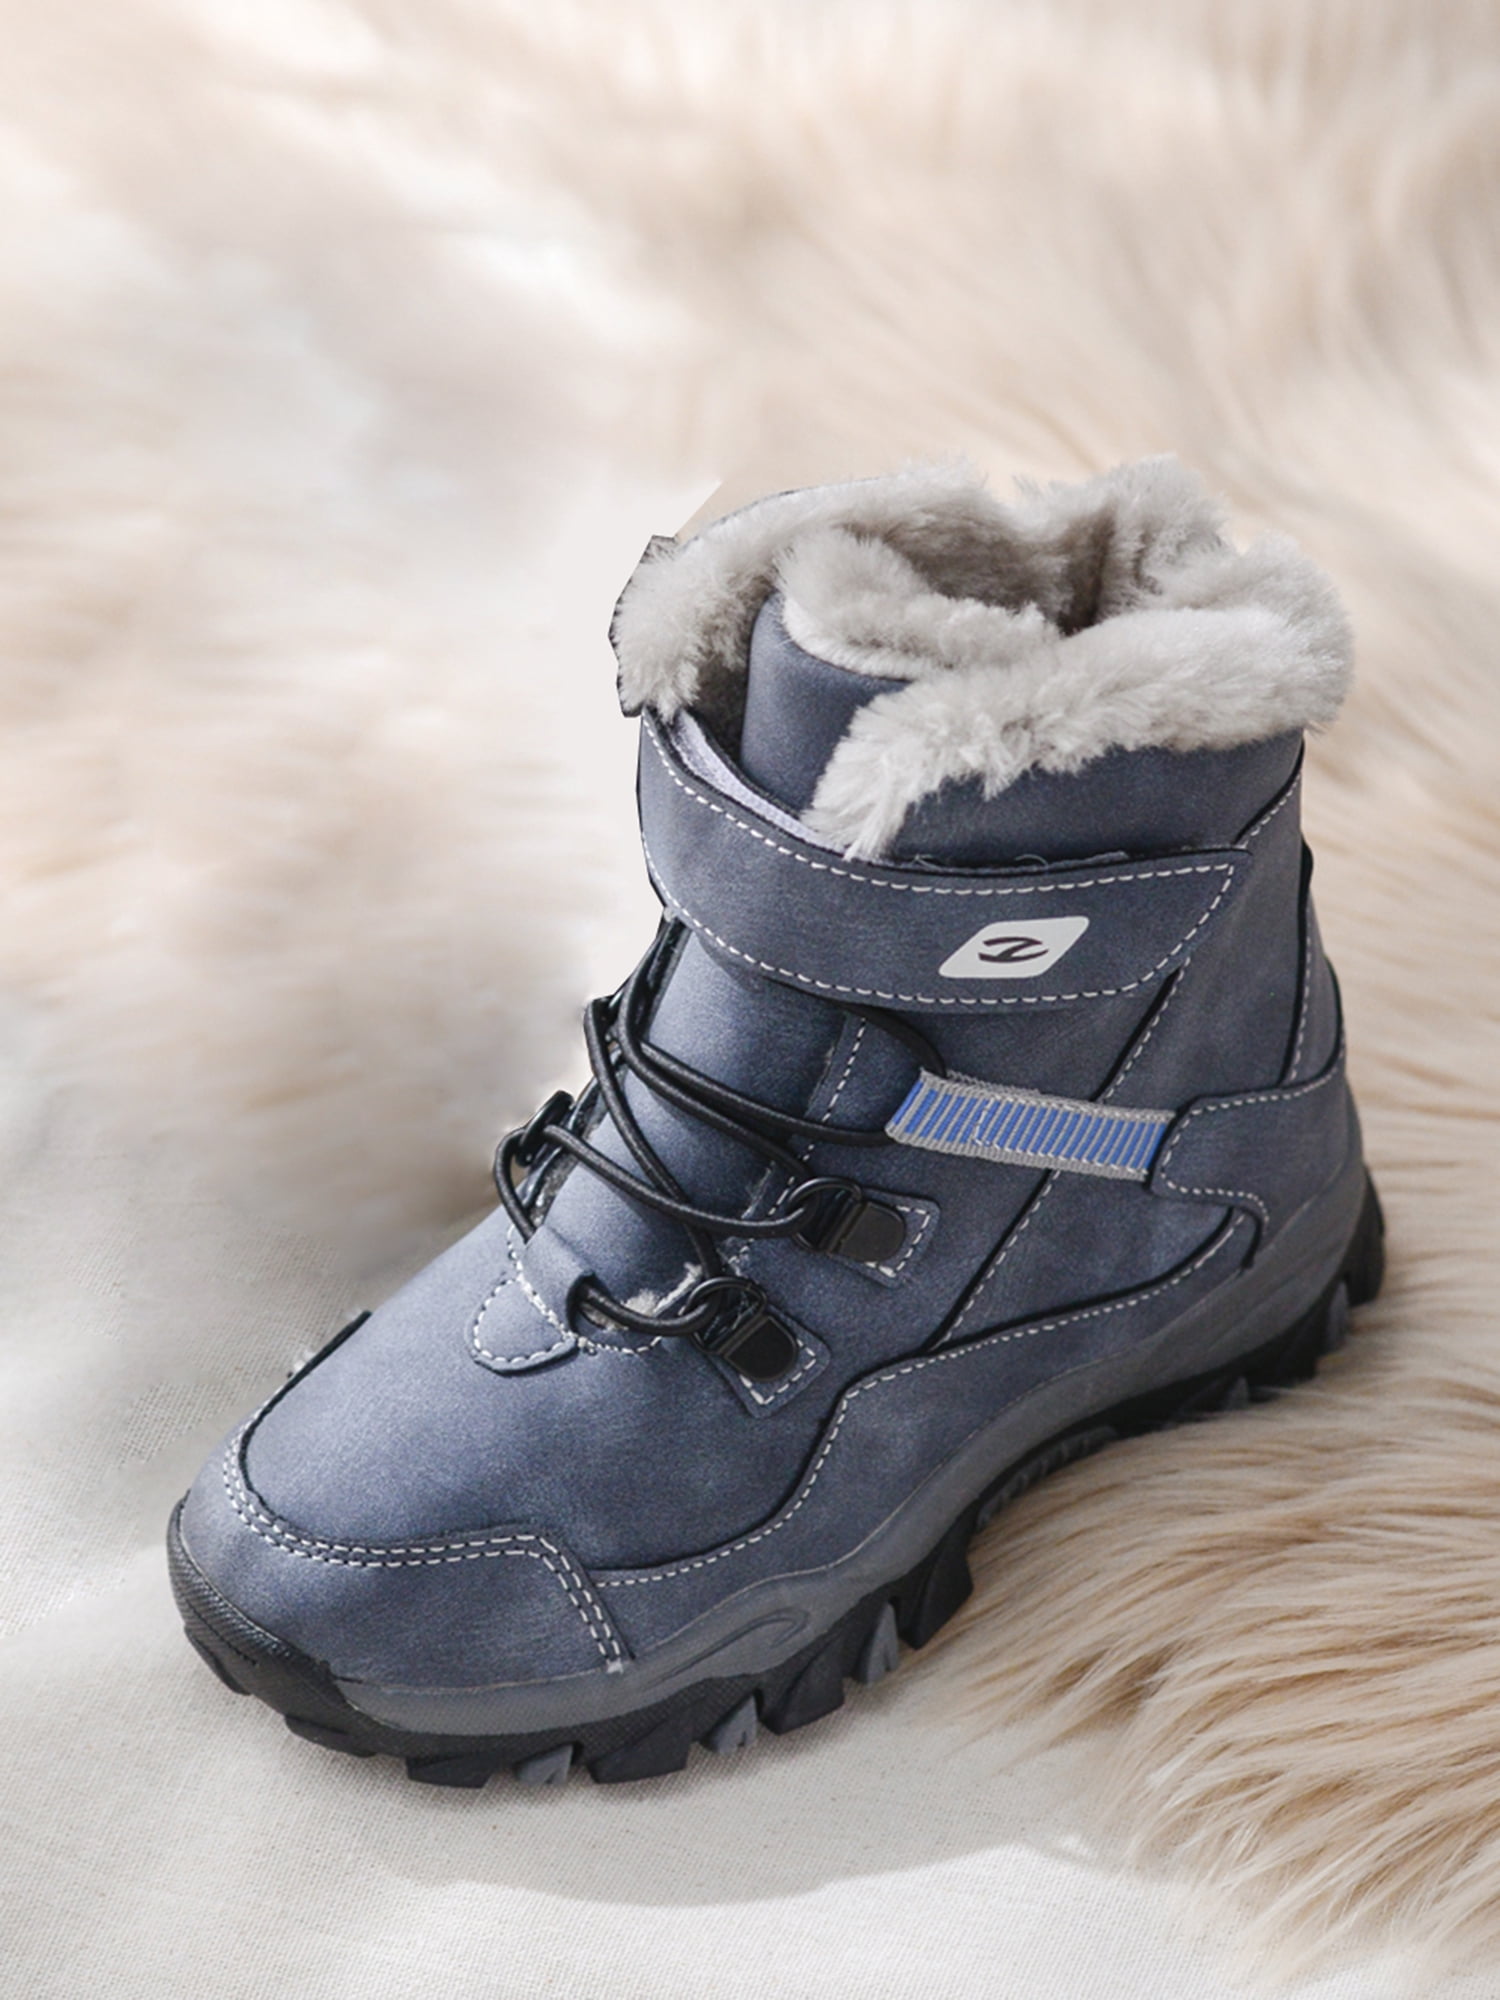 BOYS JCDEES LACE UP FUR LINED CASUAL SHOES WALKING WINTER ANKLE BOOTS N2033 